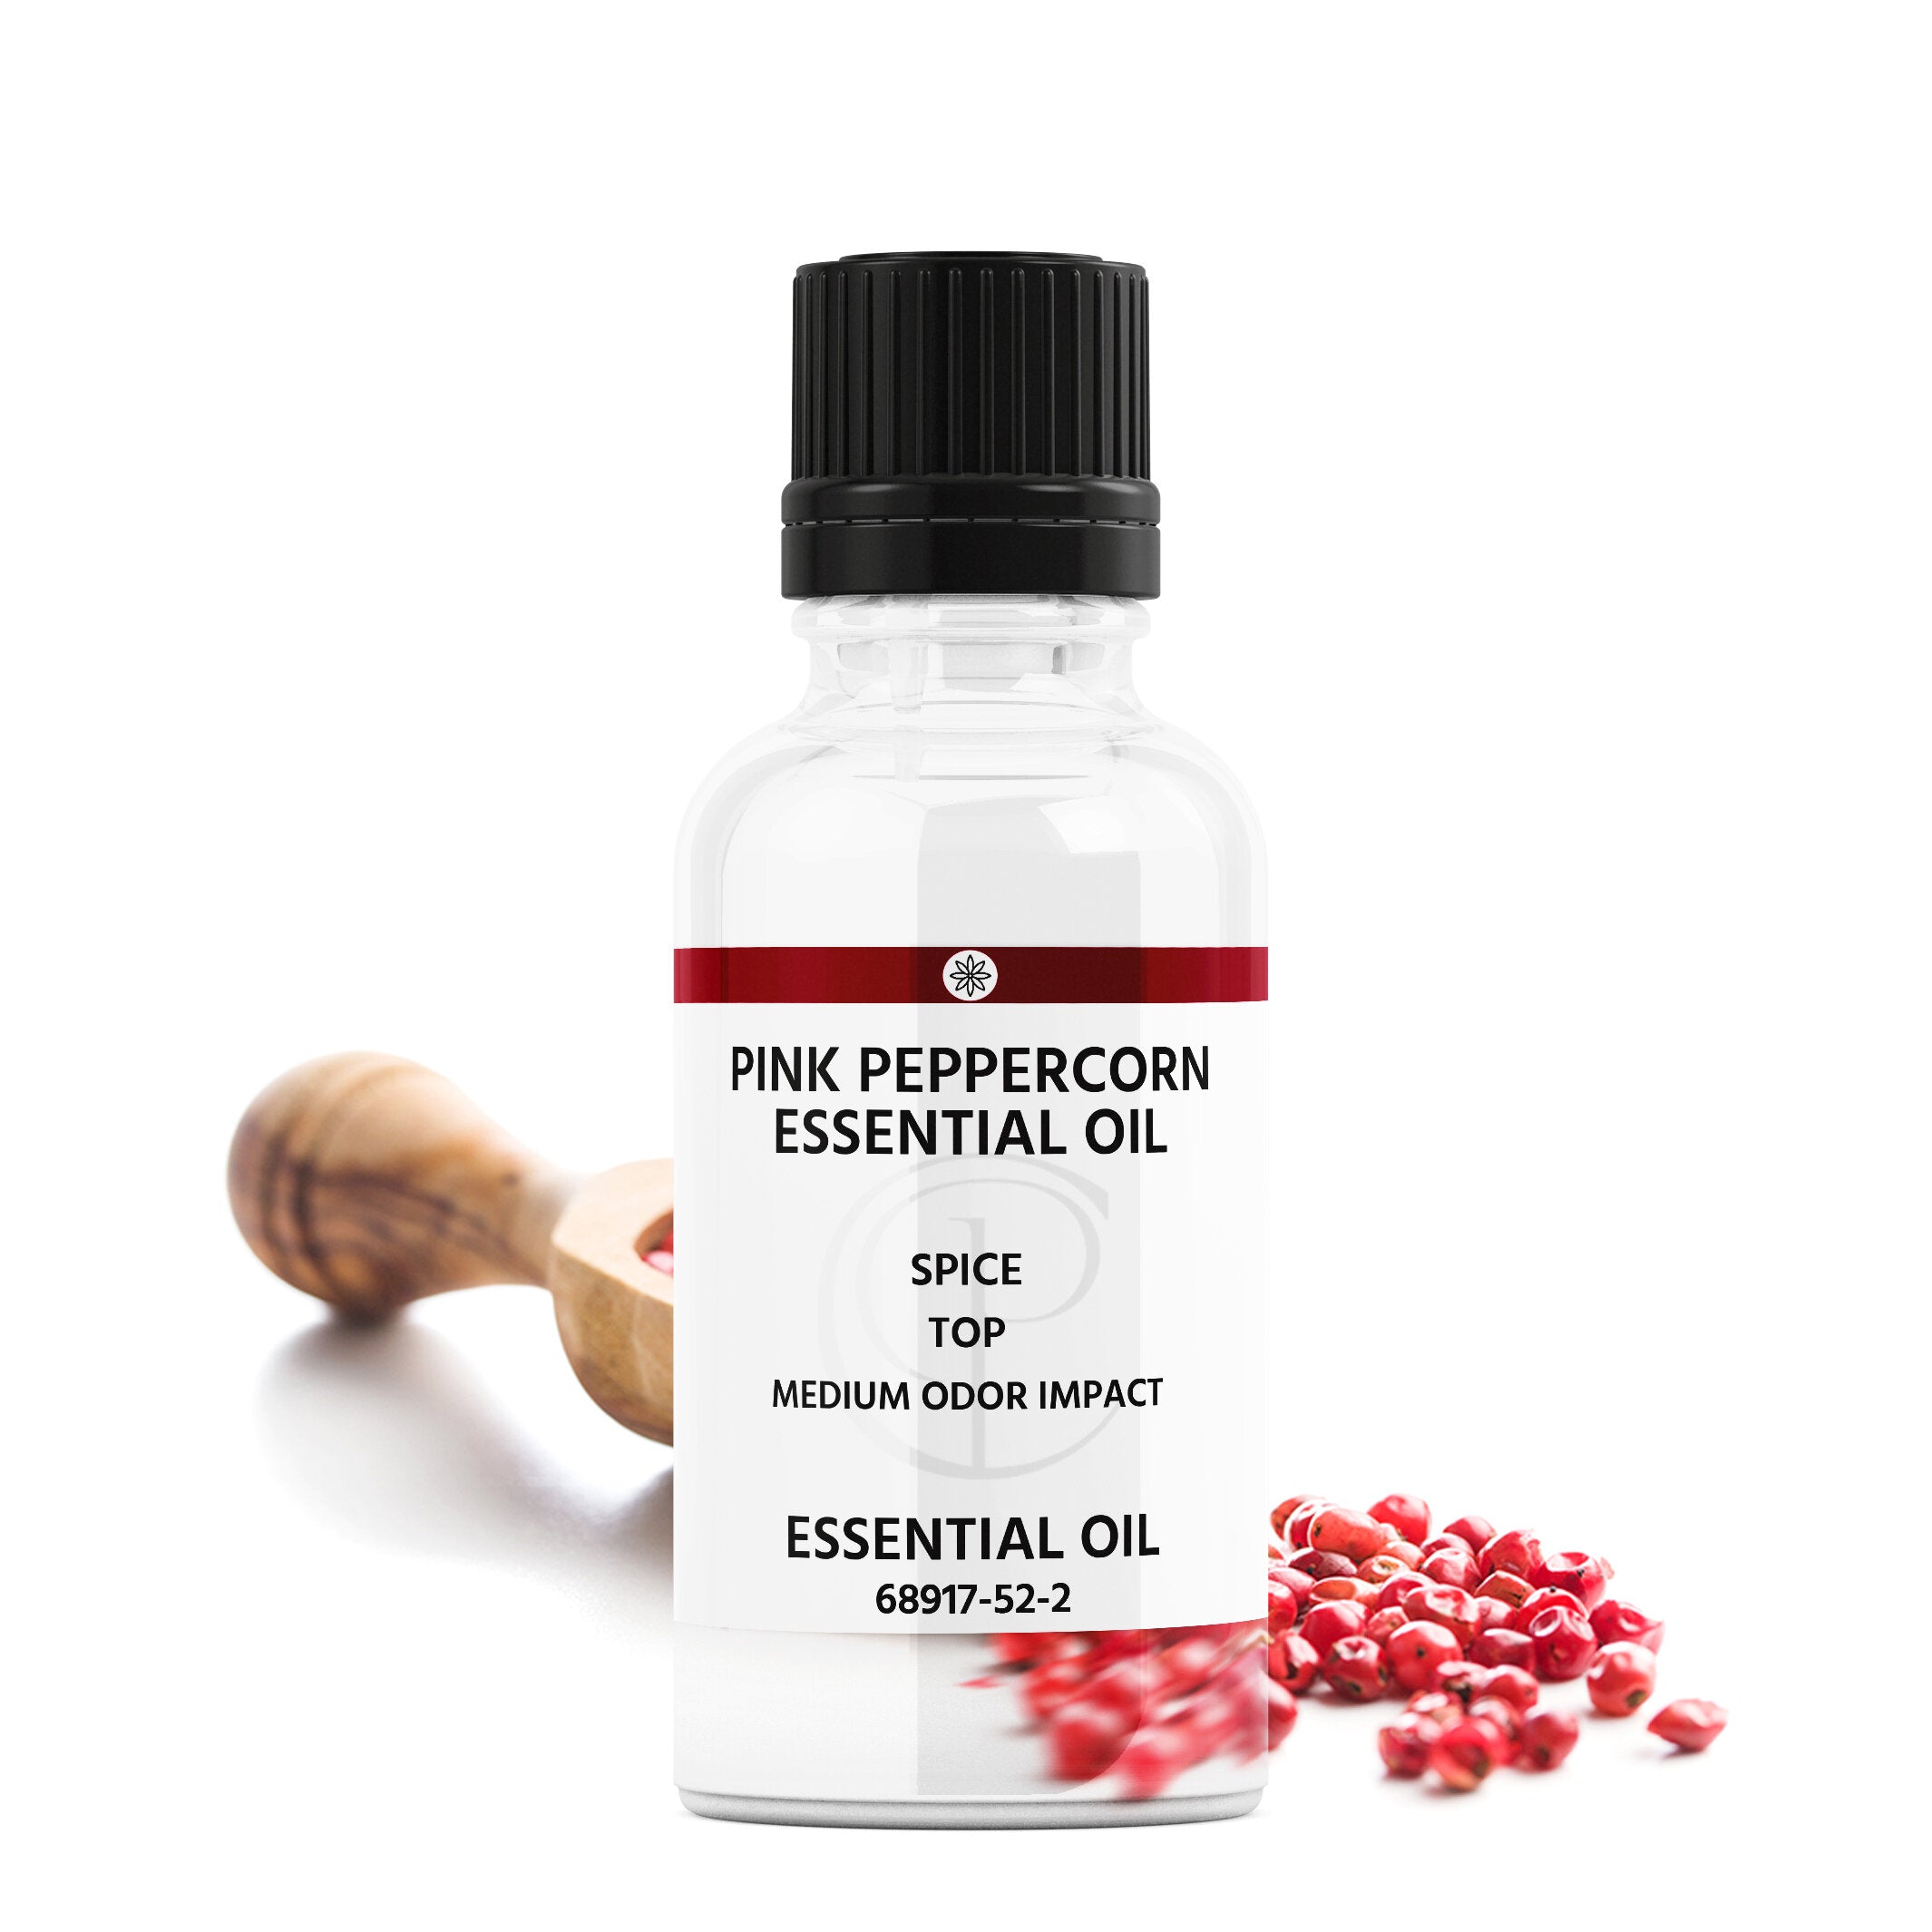 Pink Peppercorn Essential Oil Uses and Benefits